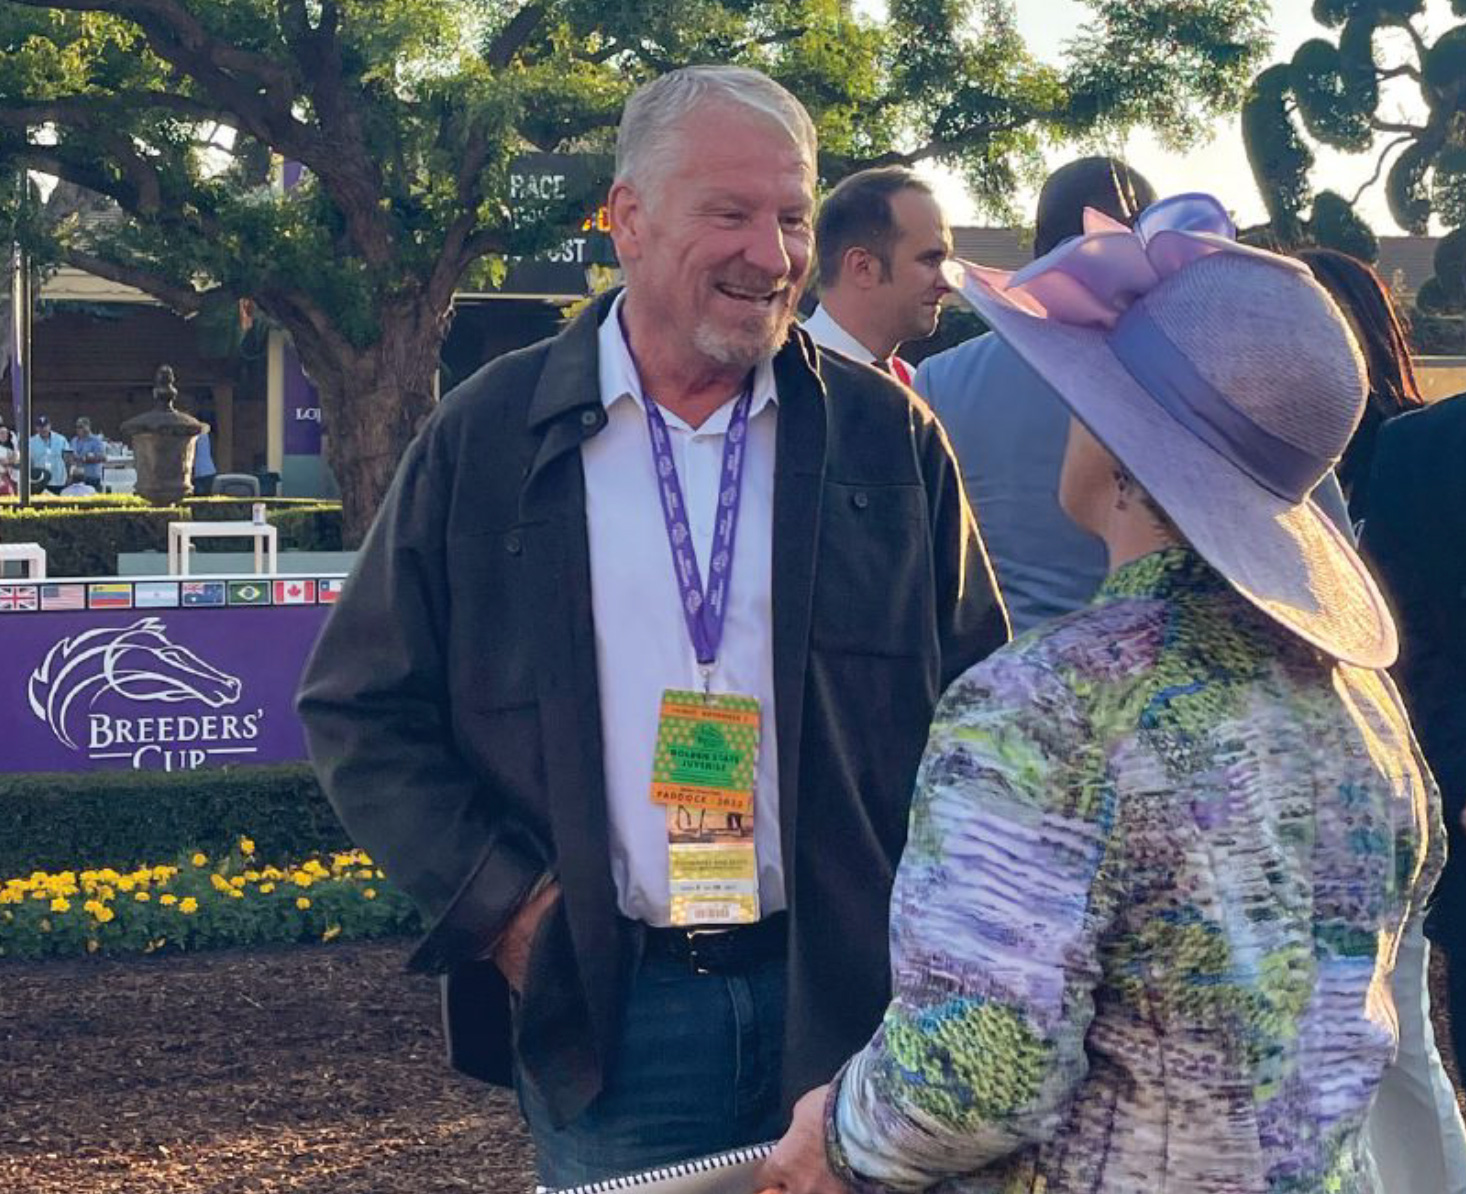 Thomas Hallasz interviewed by a lady in purple hat in a racetrack